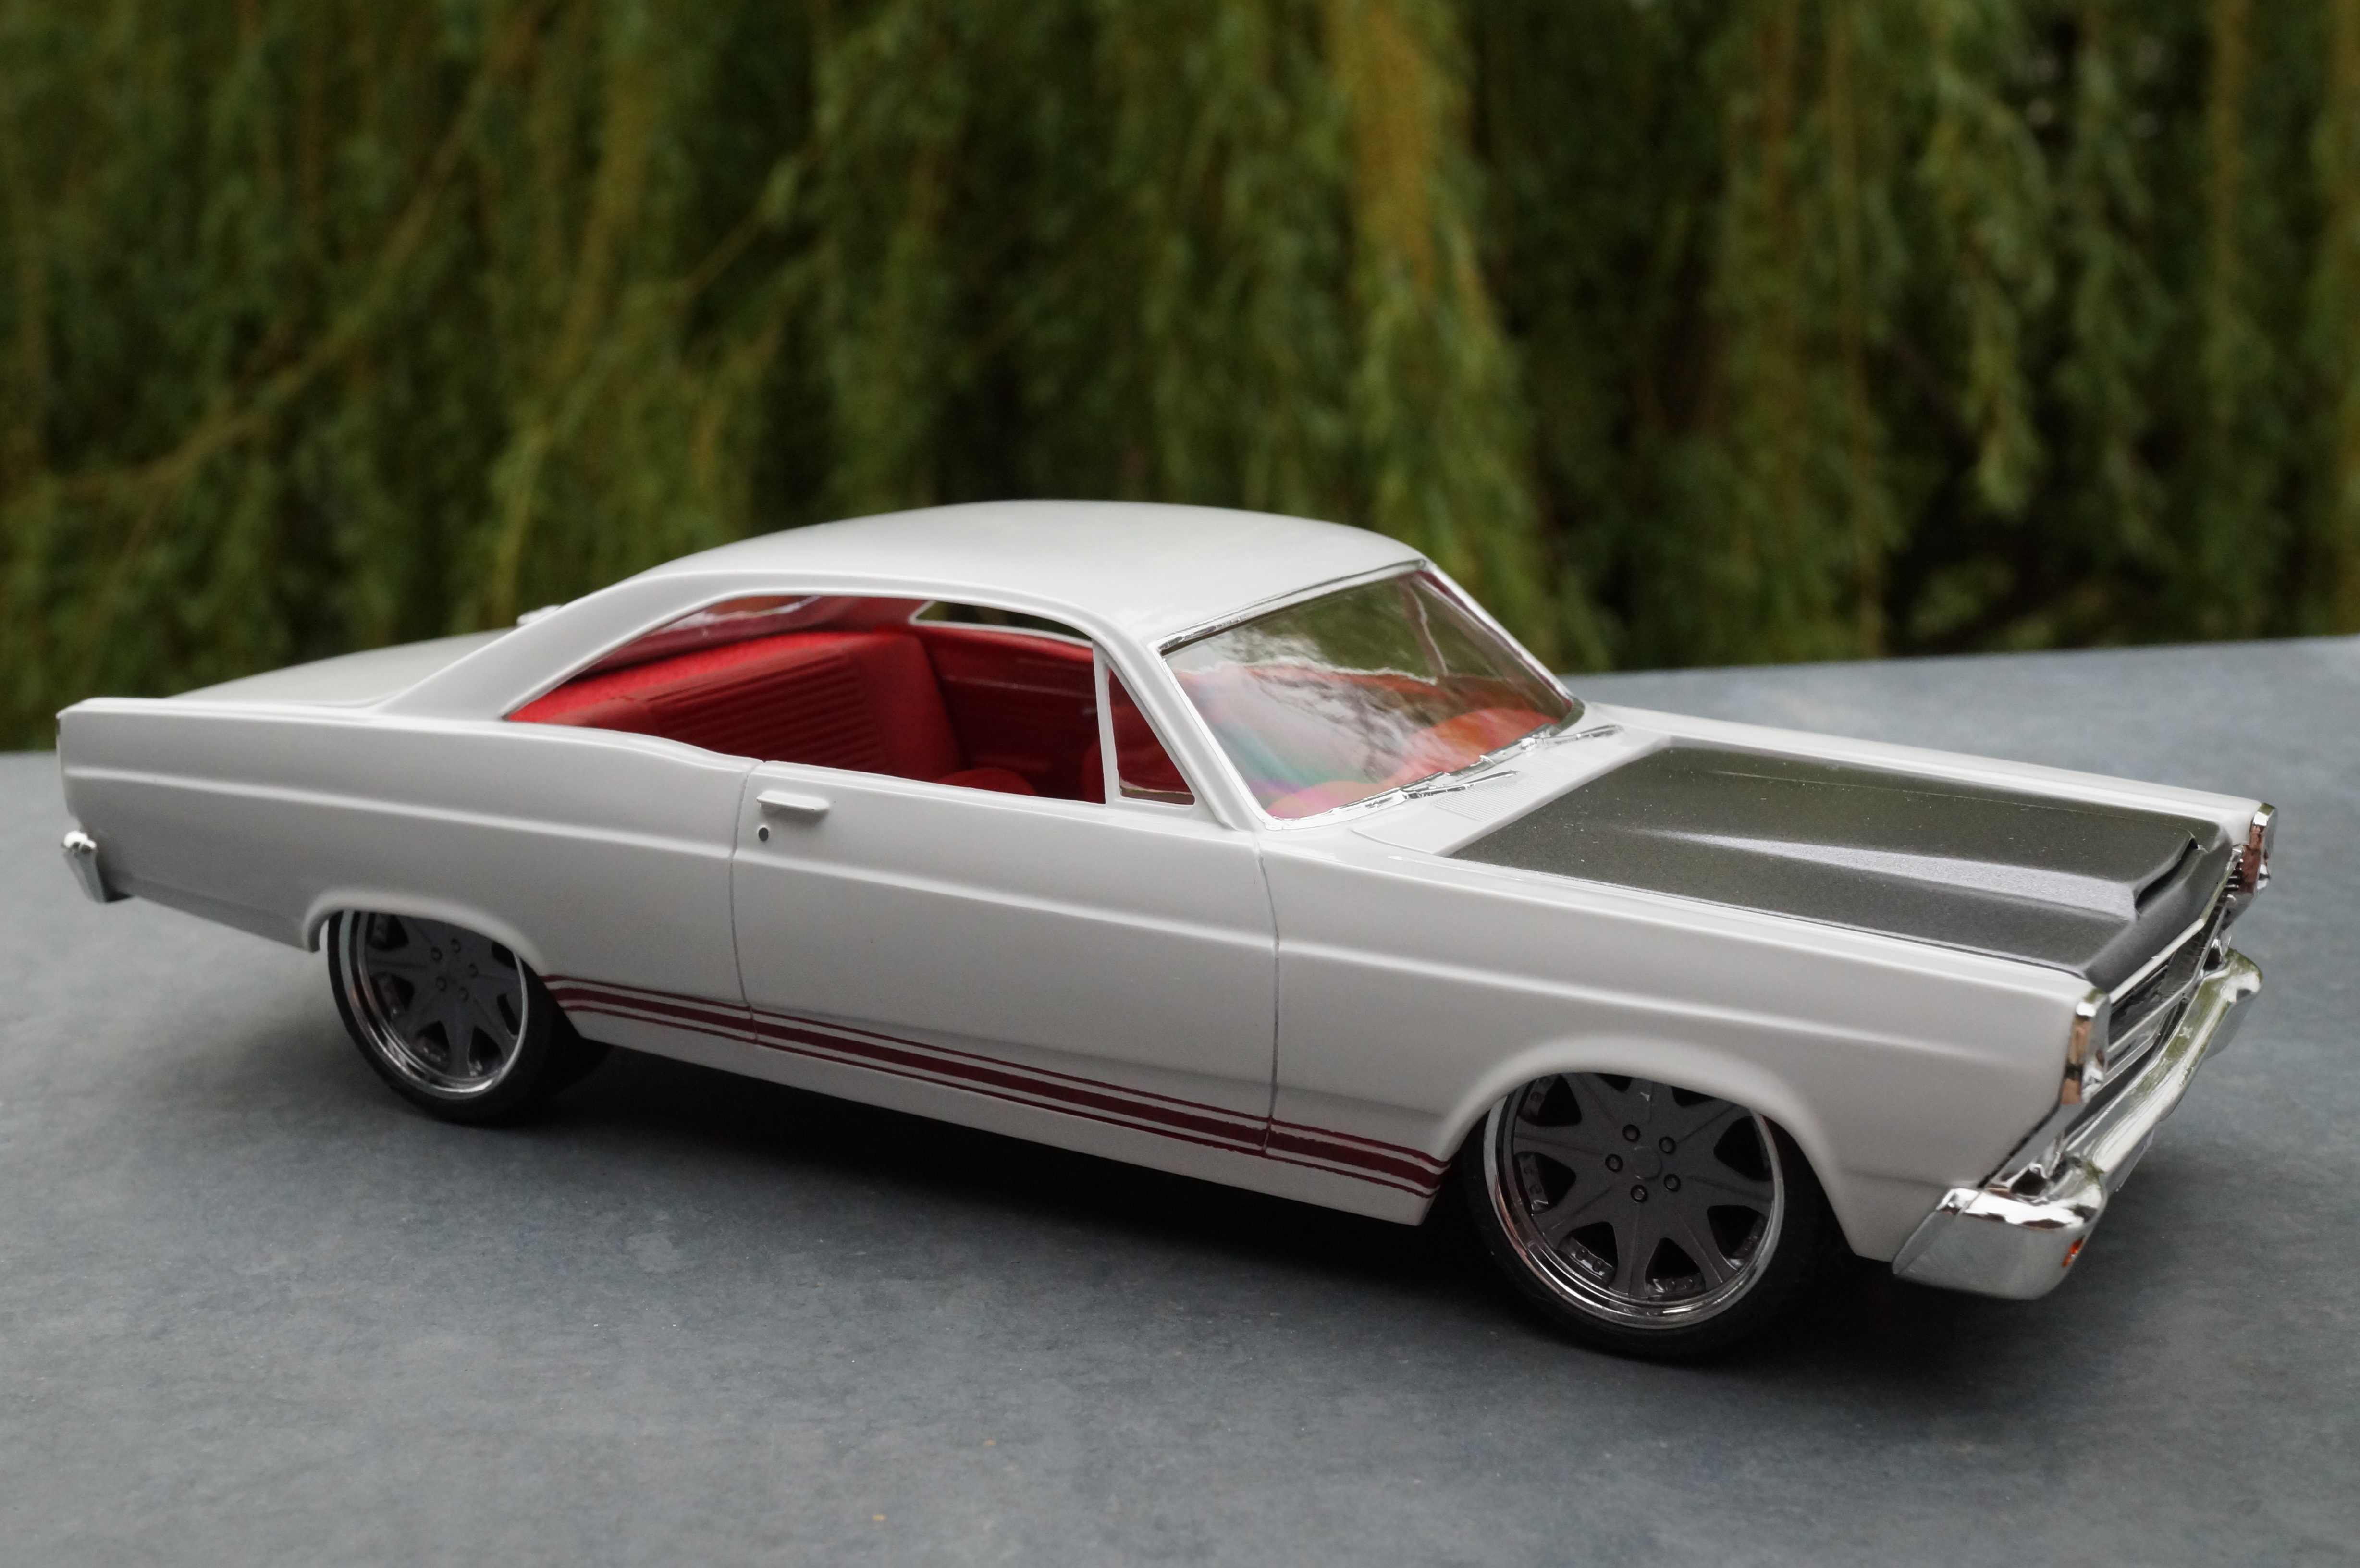 66 Ford Fairlane 427 pro touring , terminée !!! - Page 2 1505020220438898213227398